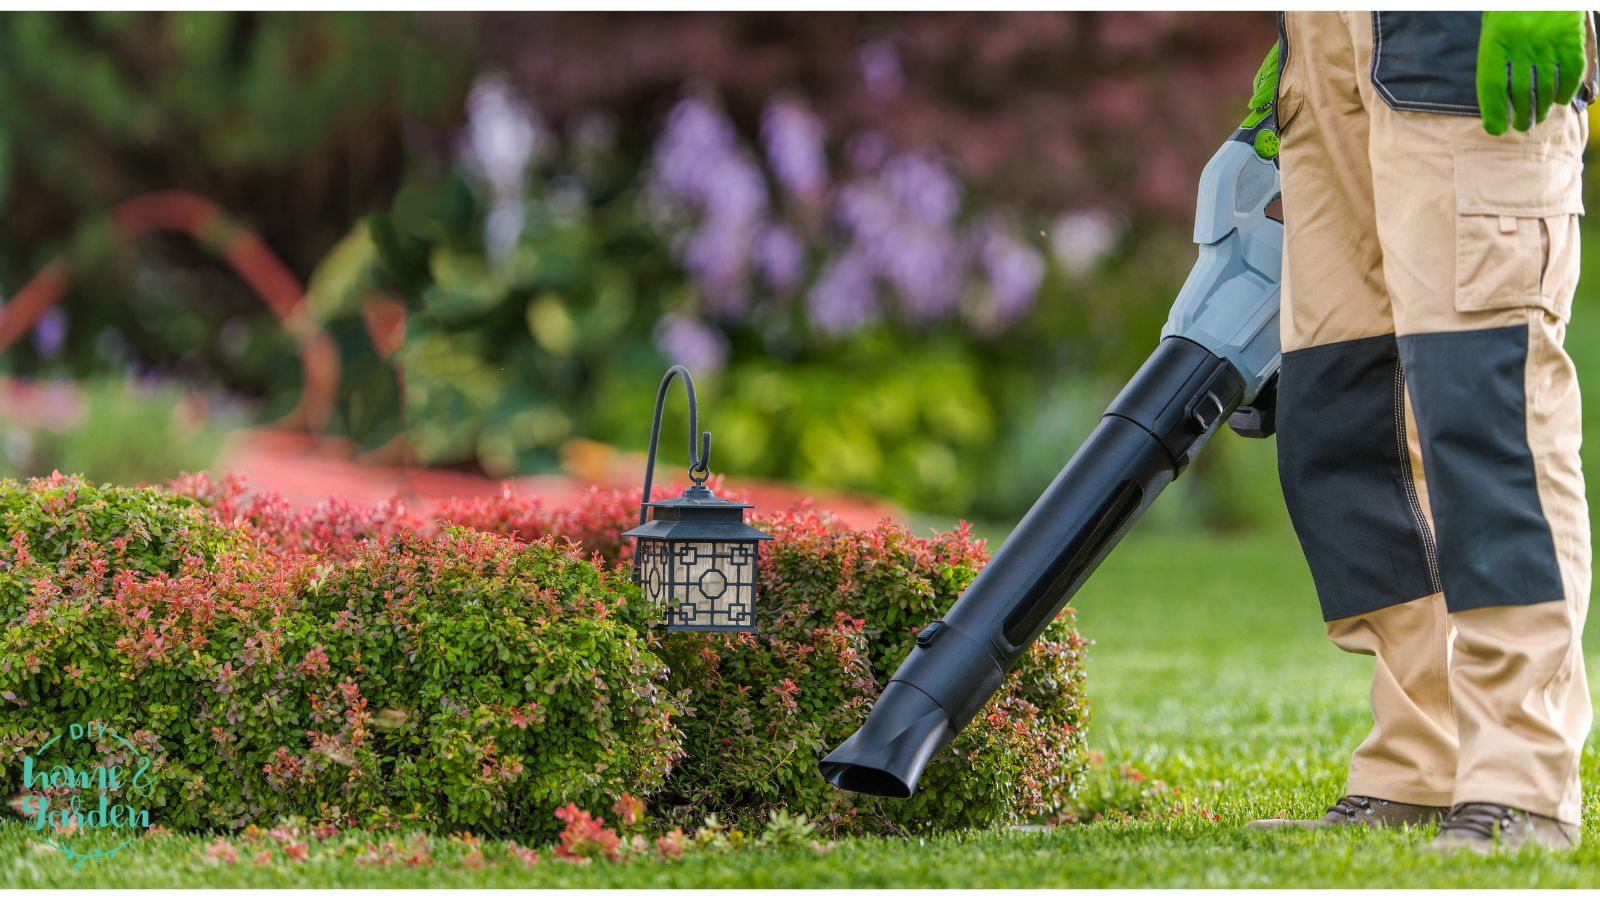 Electric Leaf Blowers: Weighing the pros and cons